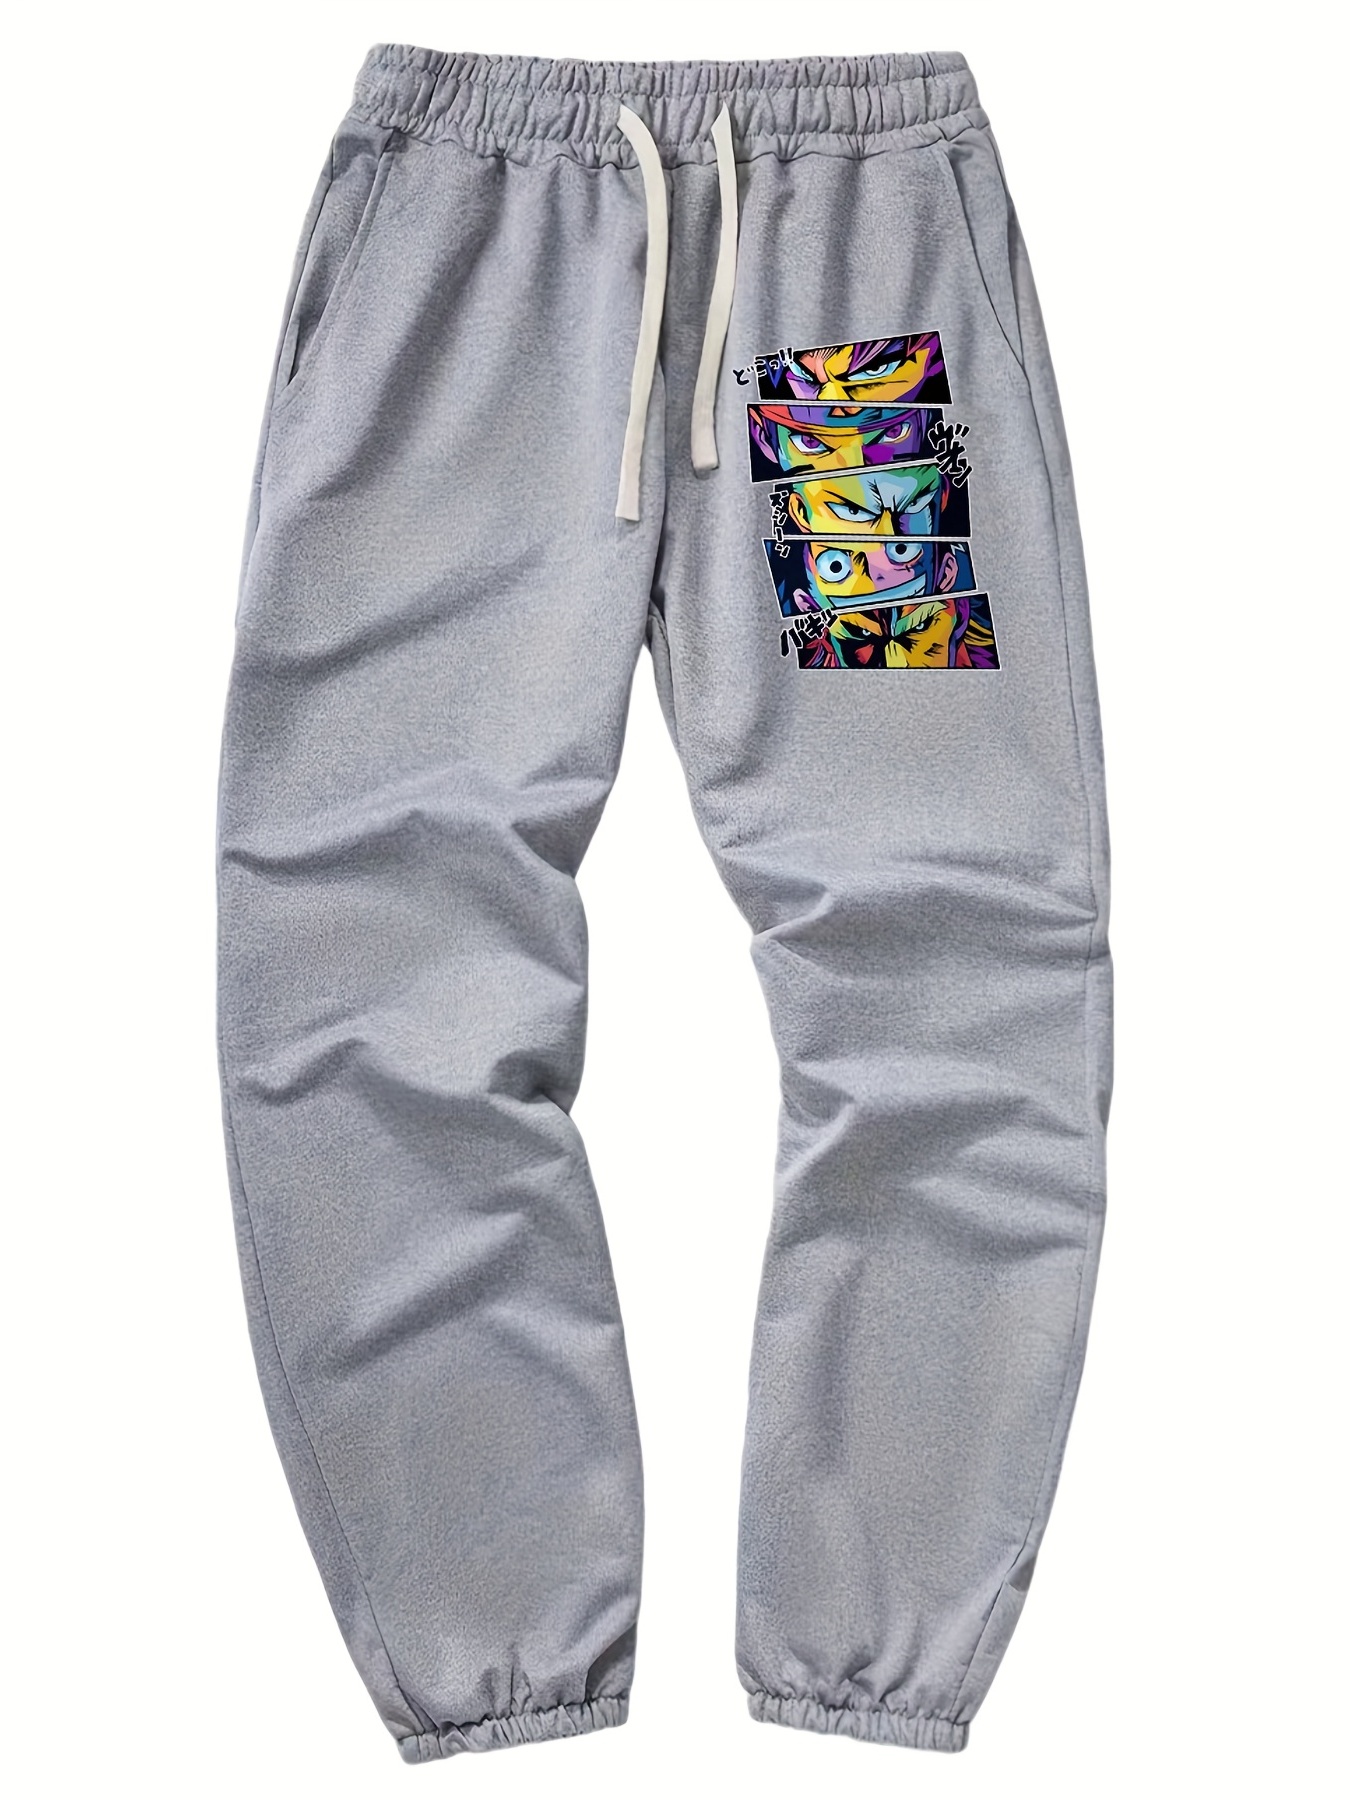 One Piece Anime Lounge Pants | Ripple Junction